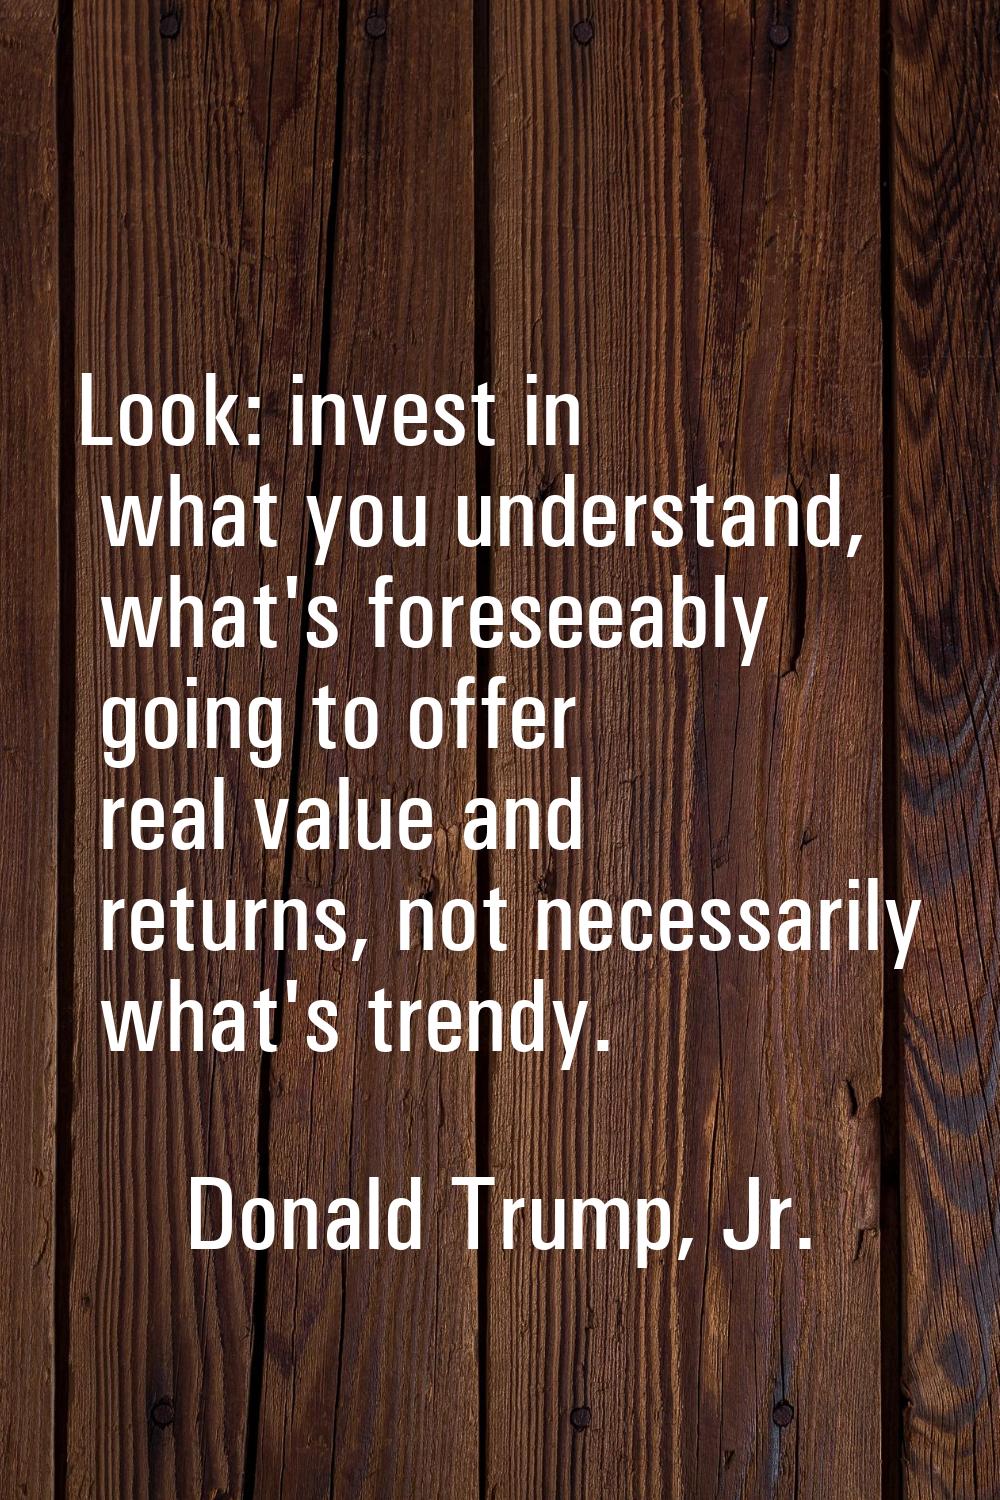 Look: invest in what you understand, what's foreseeably going to offer real value and returns, not 